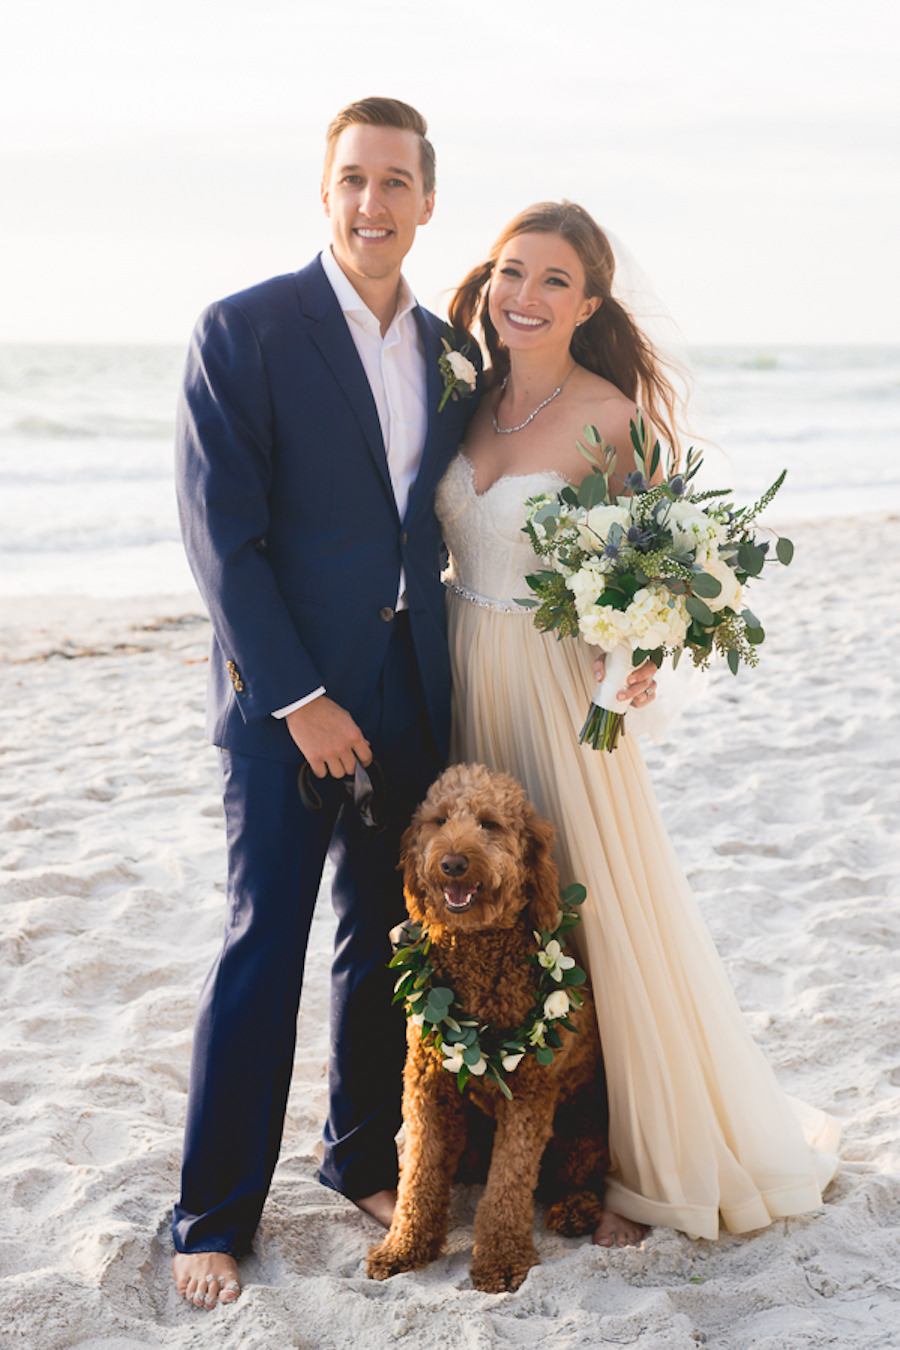 Outdoor, Florida Beach Waterfront Bride and Groom Wedding Portrait with Pet Goldendoodle | St. Petersburg Wedding Photographer Grind and Press Photography